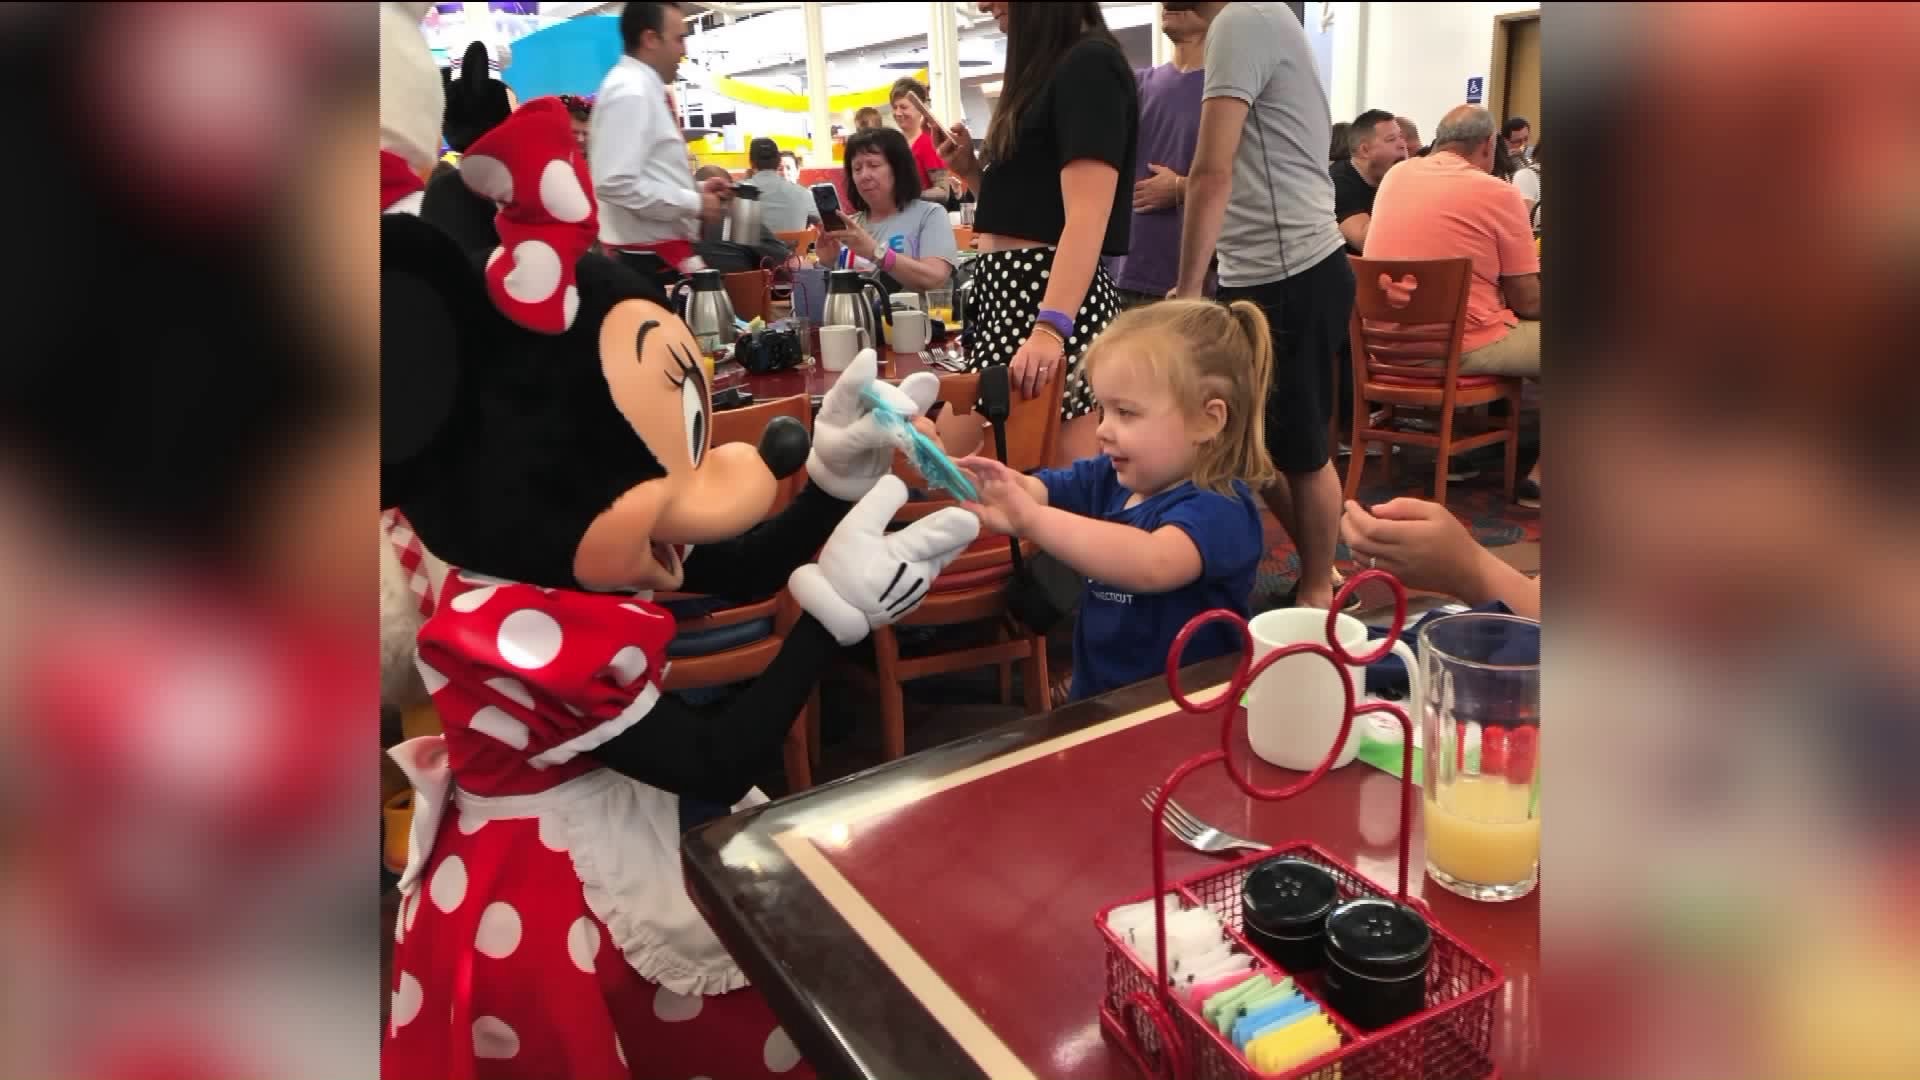 Woodbridge girl in remission goes to Disney World thanks to Make-A-Wish